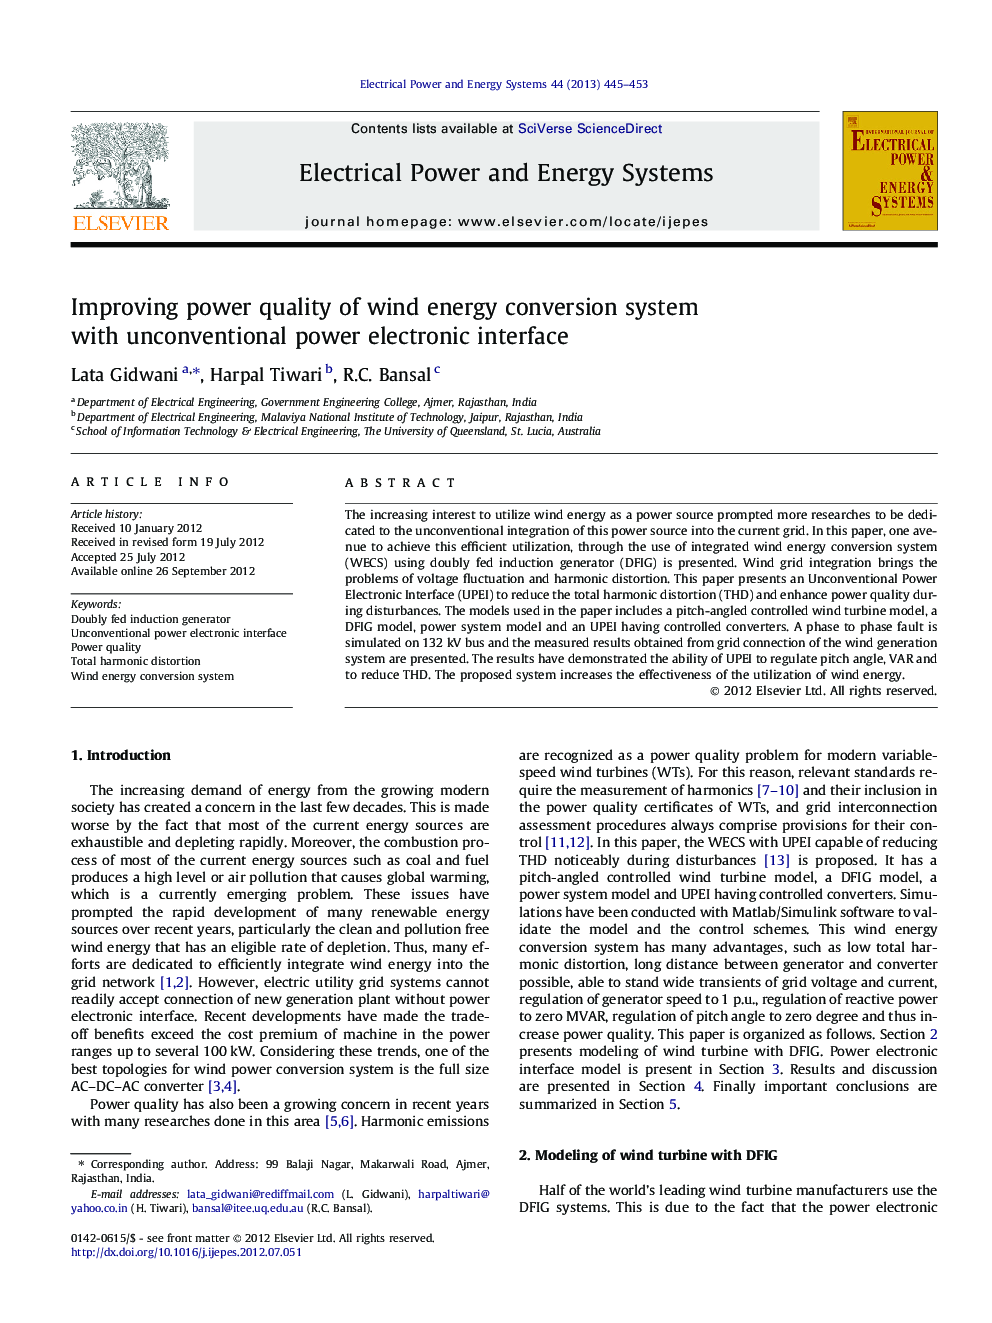 Improving power quality of wind energy conversion system with unconventional power electronic interface